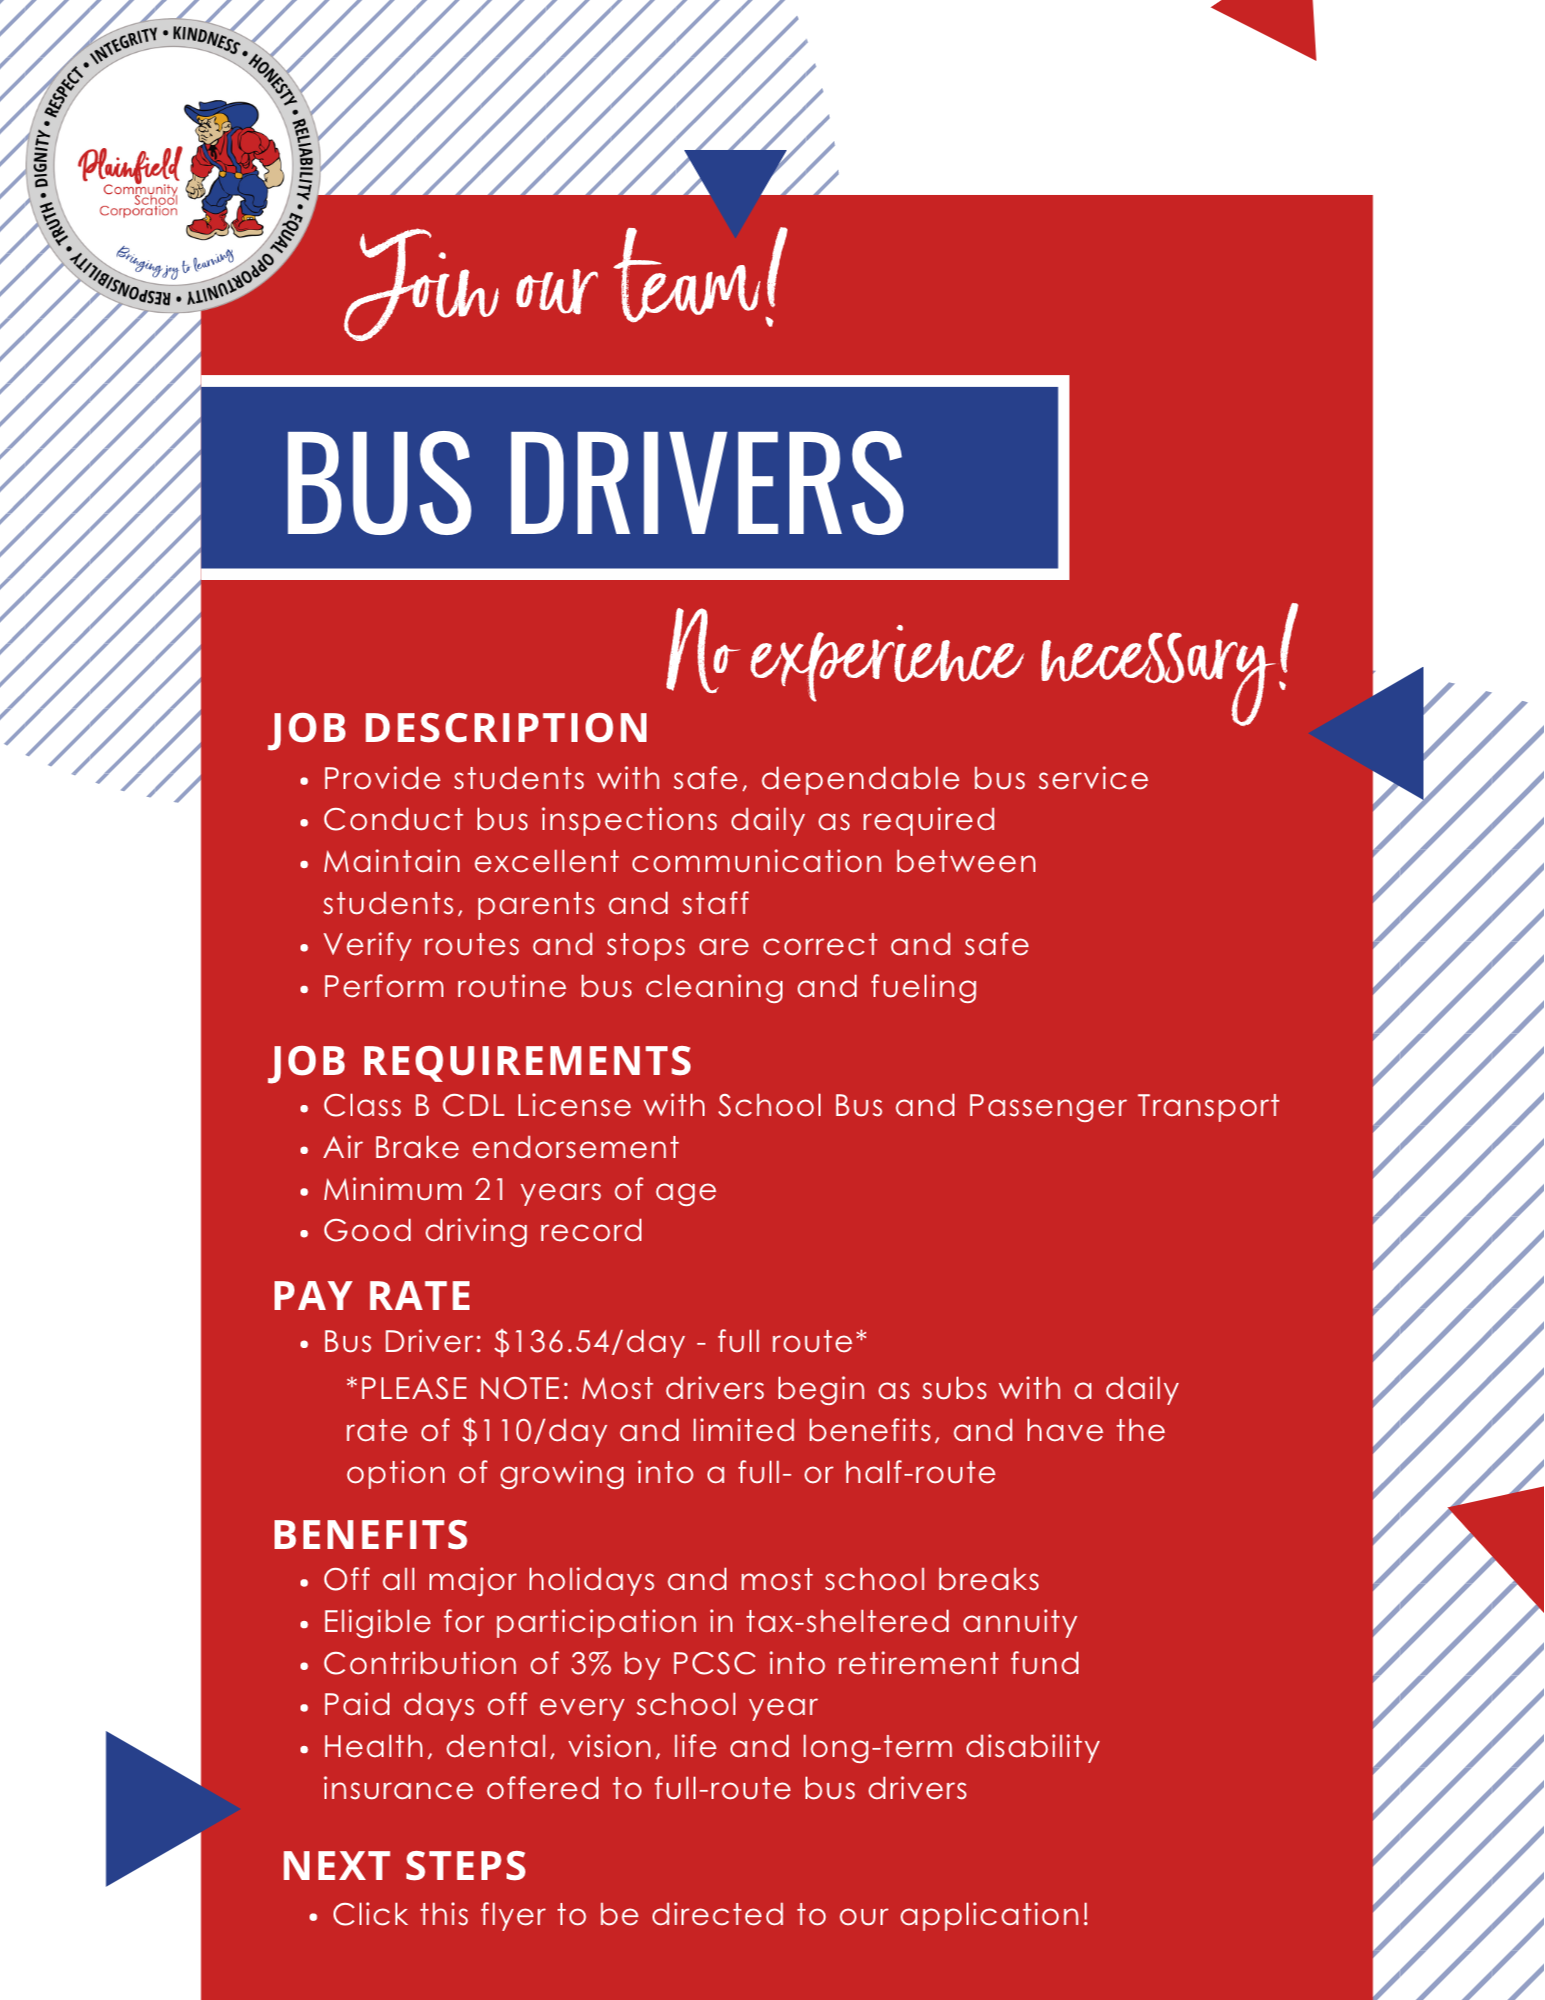 Details about being a bus driver with Plainfield Schools